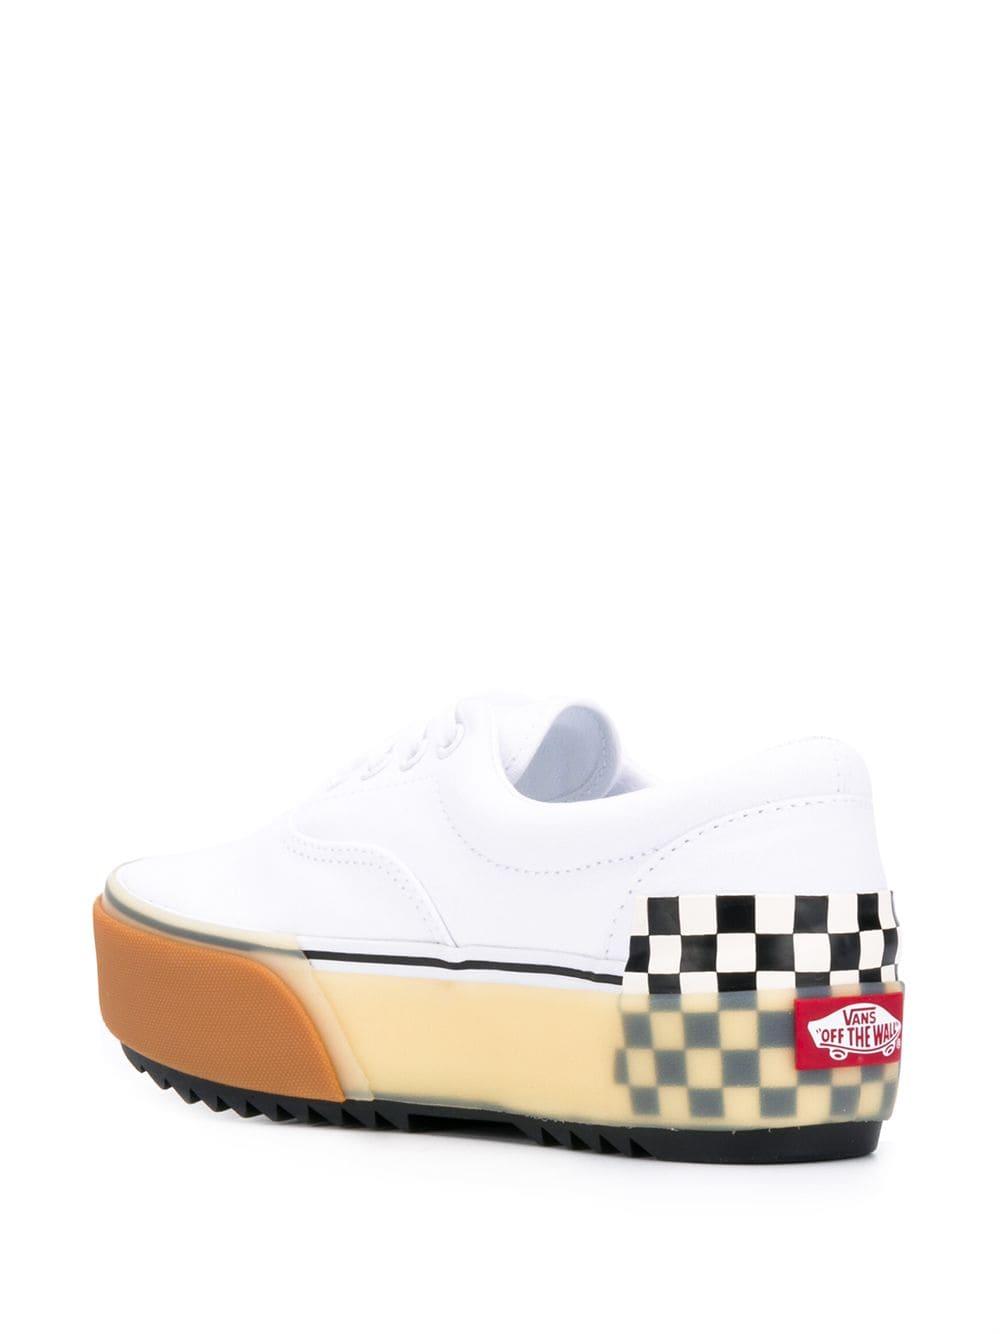 Vans Rubber Era Stacked Sneakers in White | Lyst